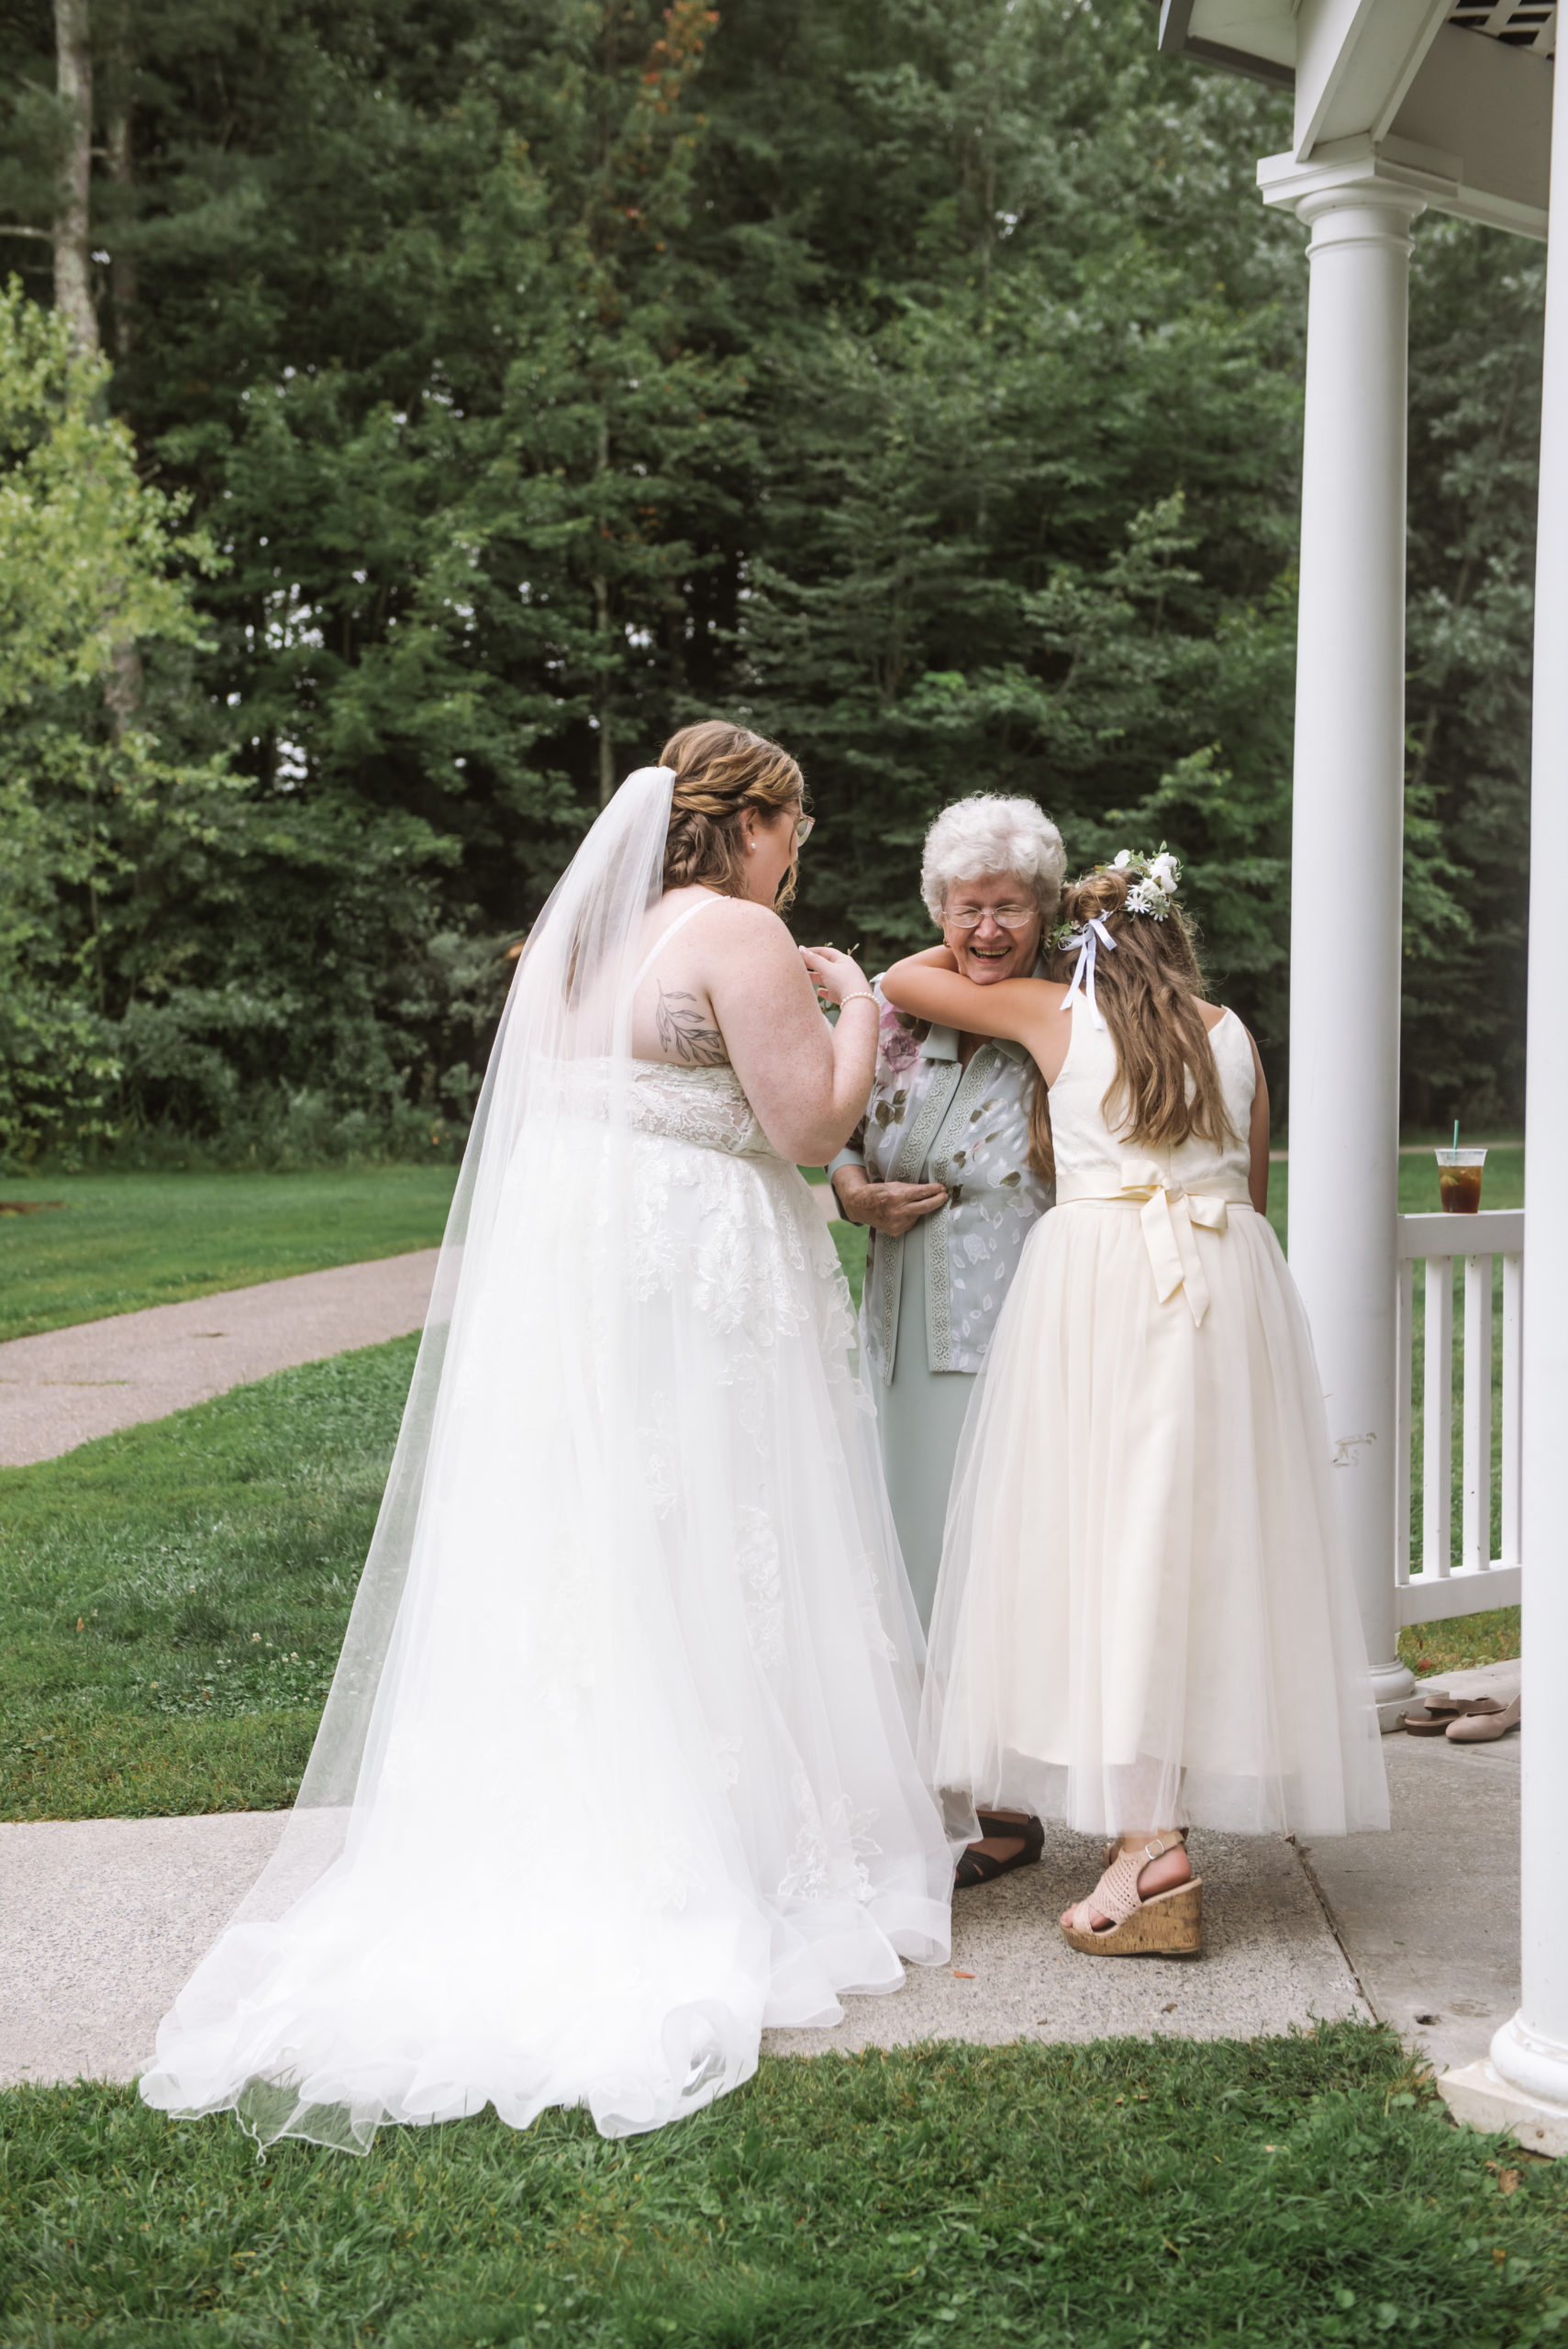 Tender moment with the bride, her grandmother, and one of the bride's younger family members. The younger family member is actively hugging the bride's grandmother who is smiling open-mouthed. The bride is facing toward her grandmother, away from the camera. There are trees in the background.